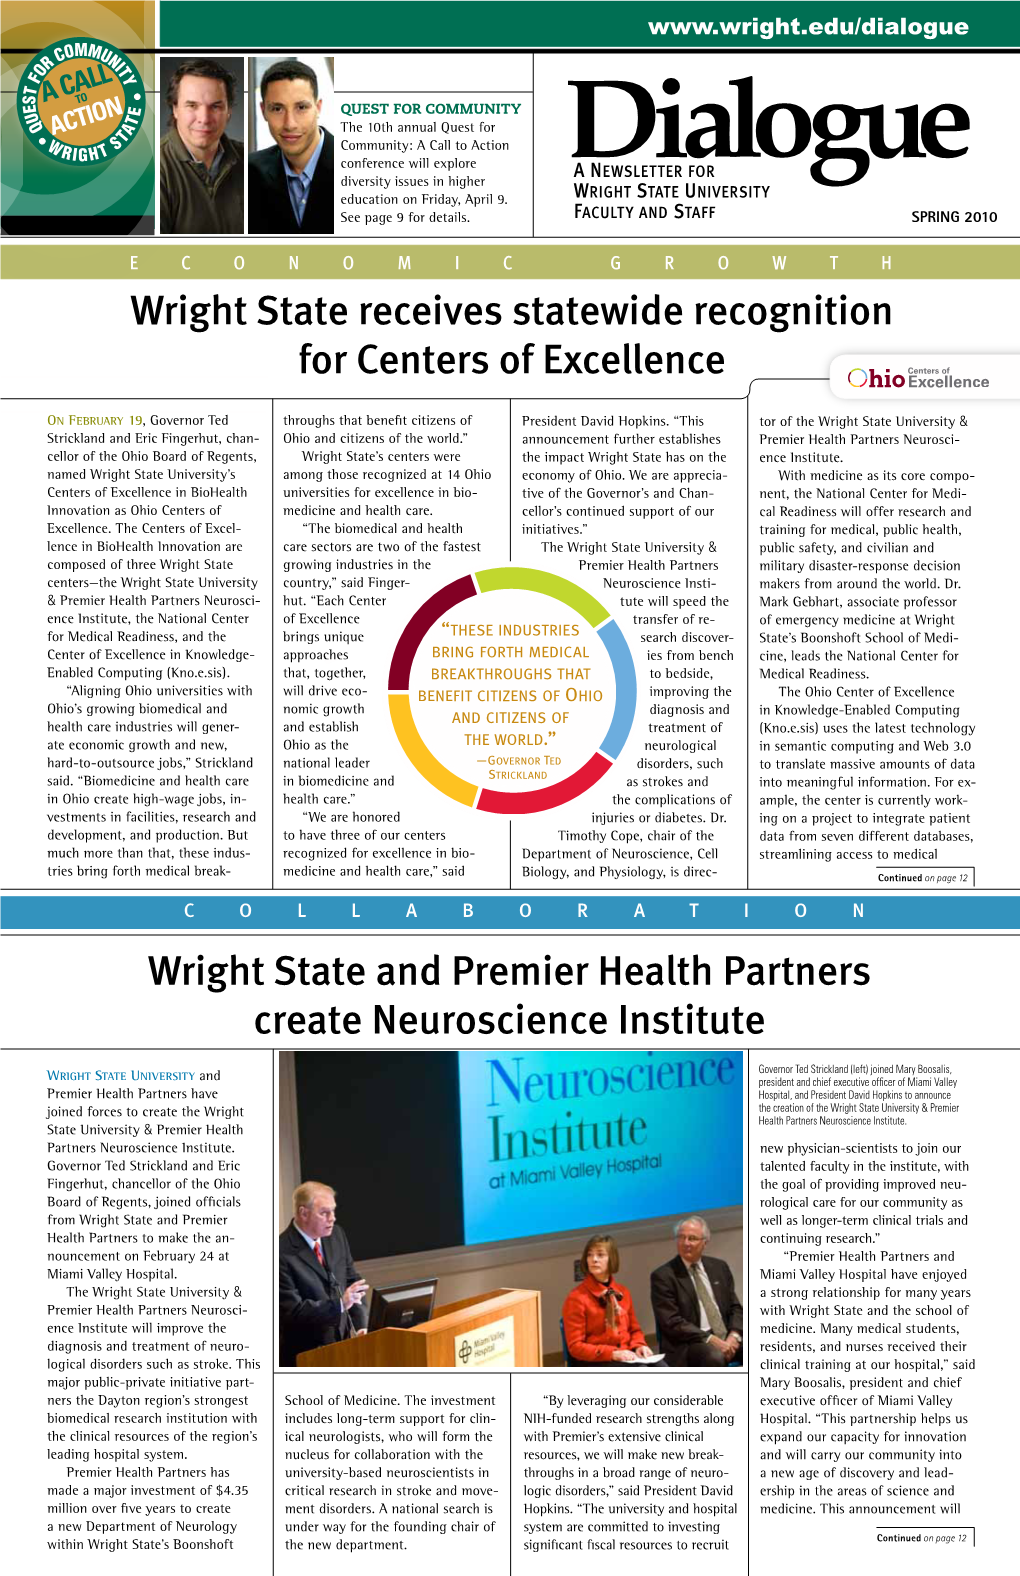 Wright State and Premier Health Partners Create Neuroscience